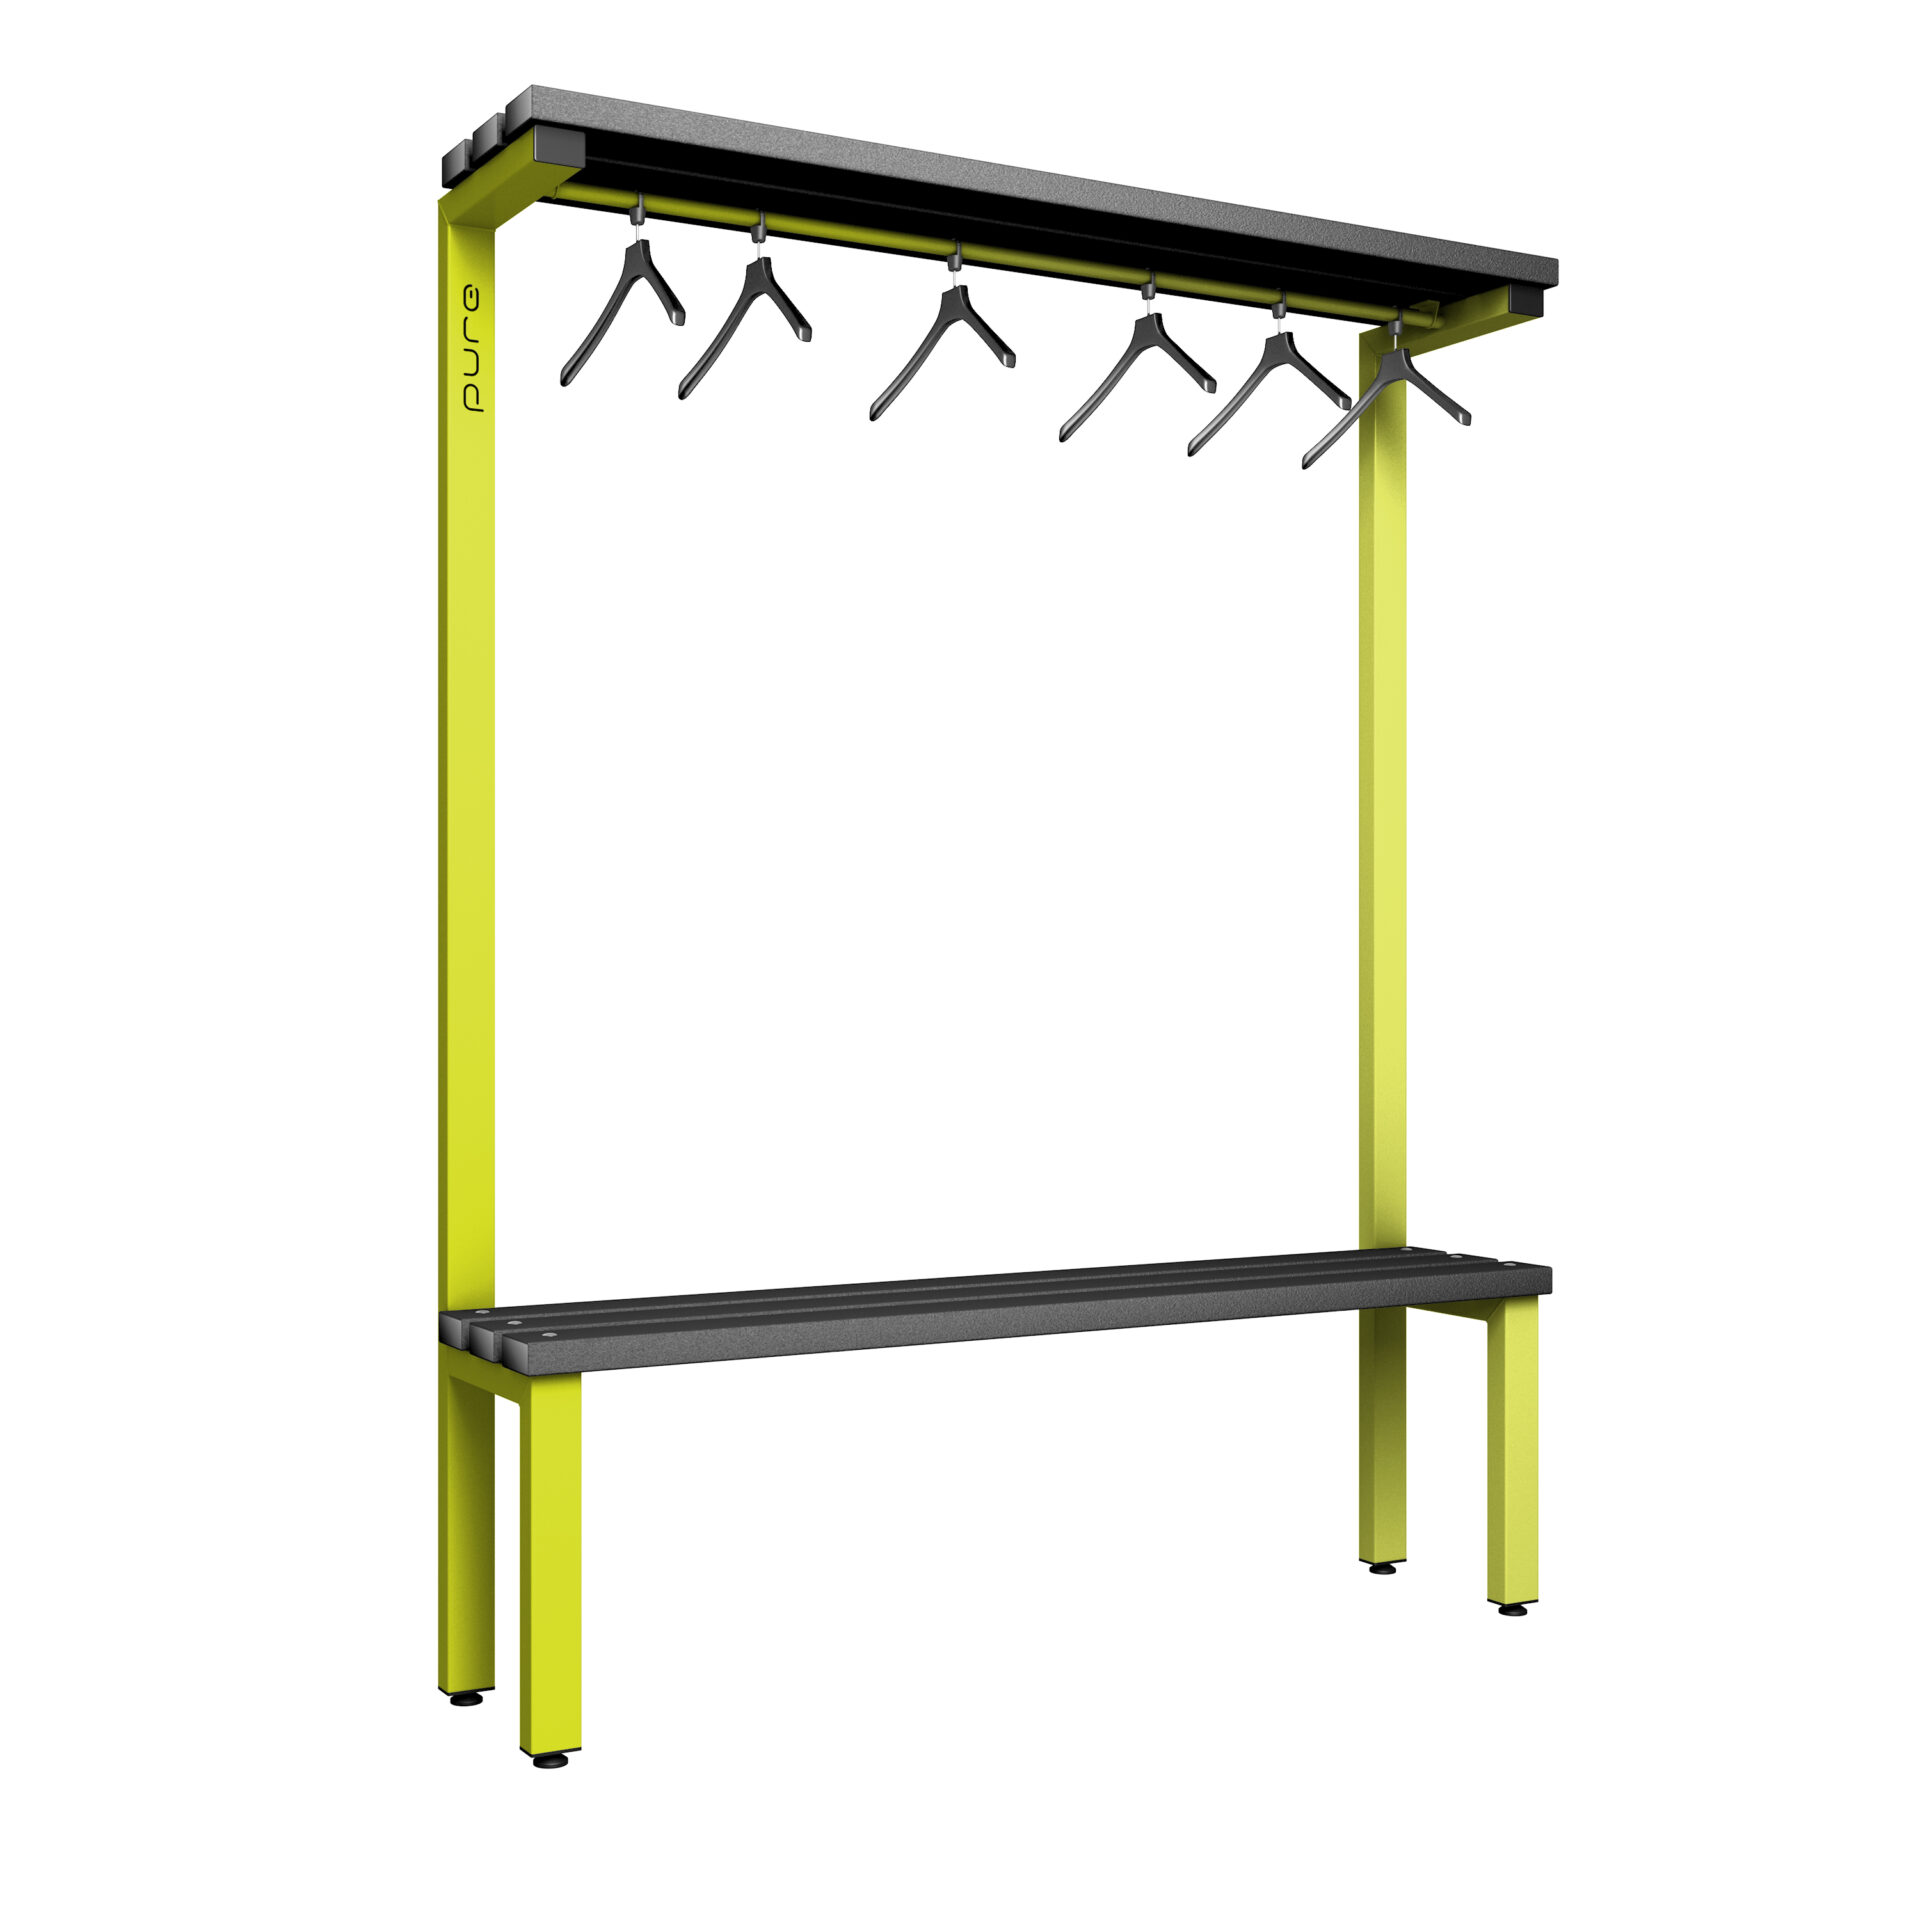 Pure Carbon Zero Single Sided 1500mm Overhead Hanging Bench